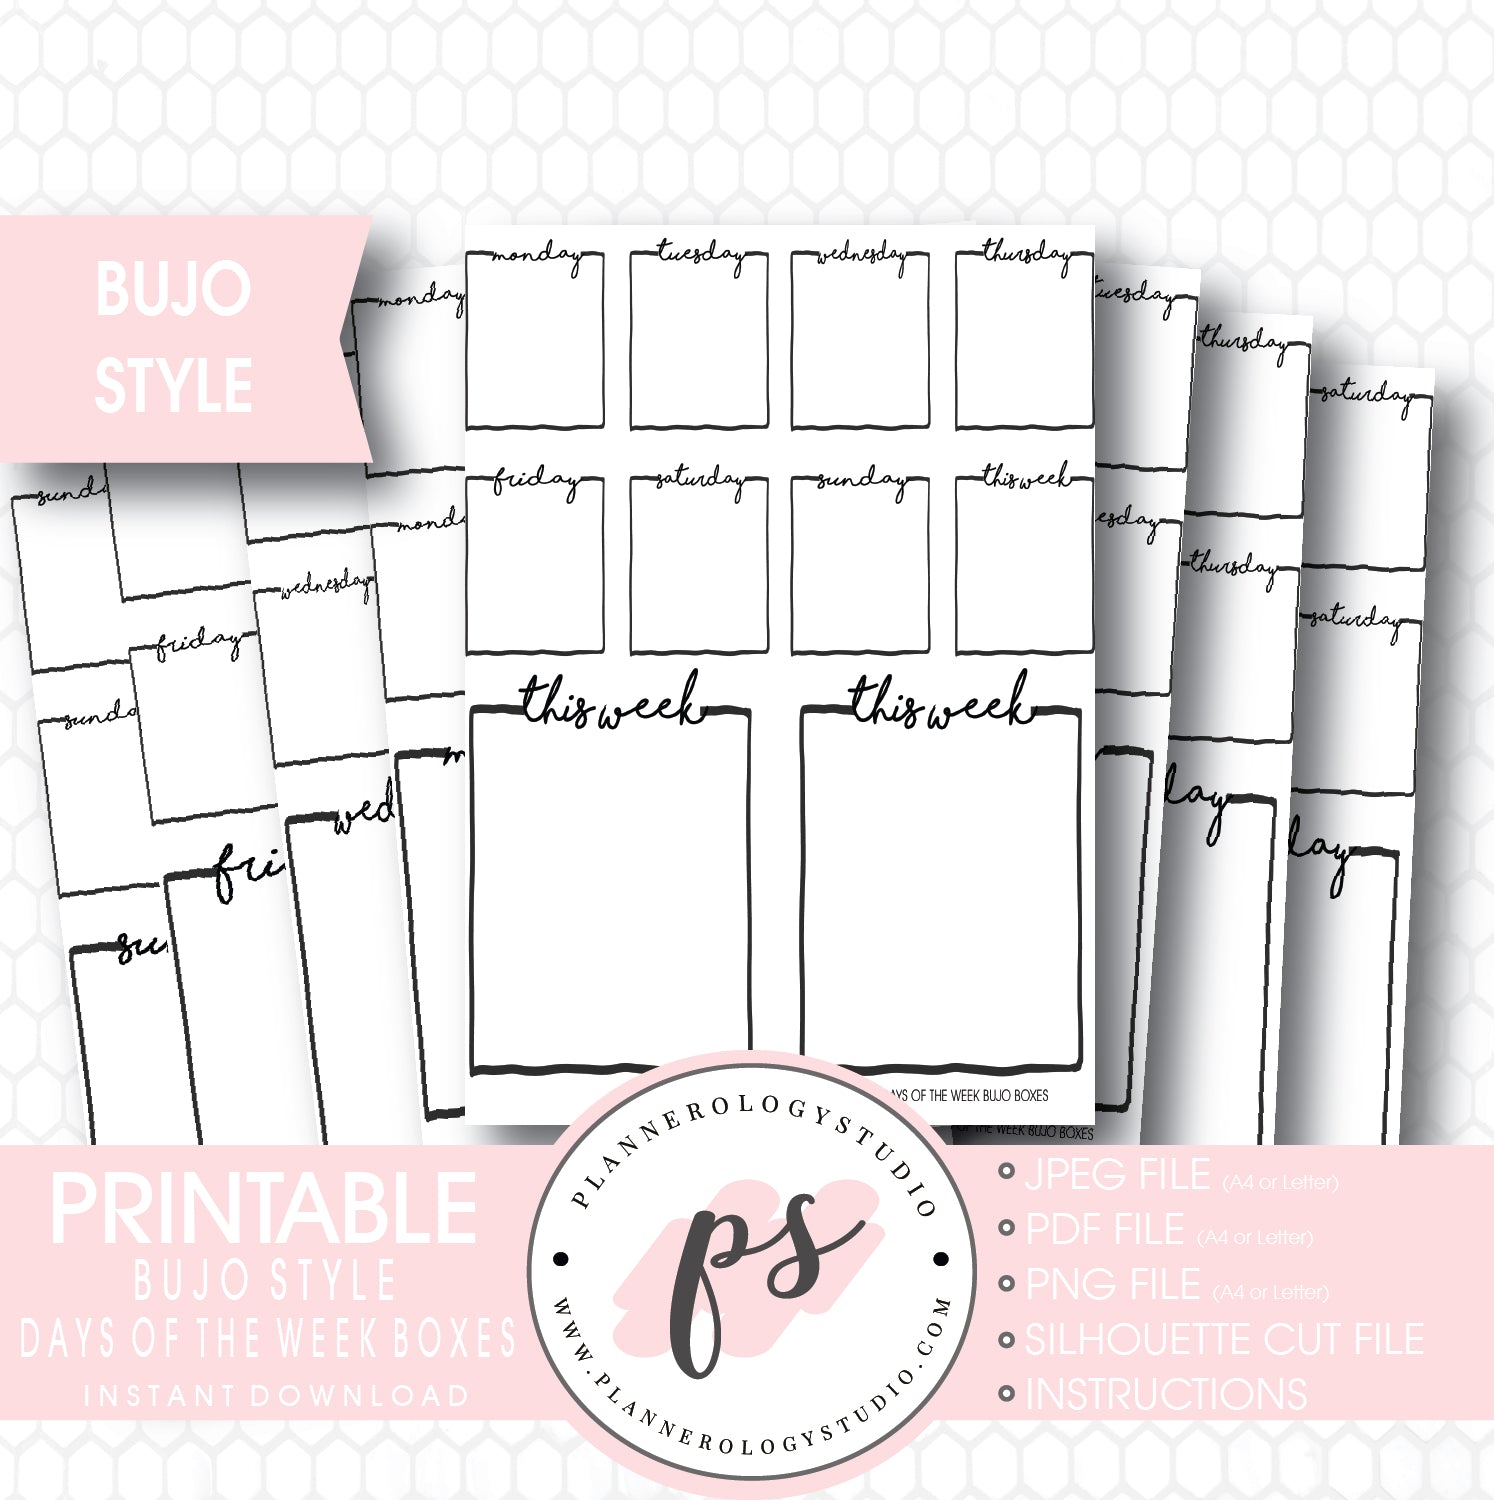 Bullet Journal Bujo Days of the Week (Monday to Friday) Boxes Printable Planner Stickers - Plannerologystudio